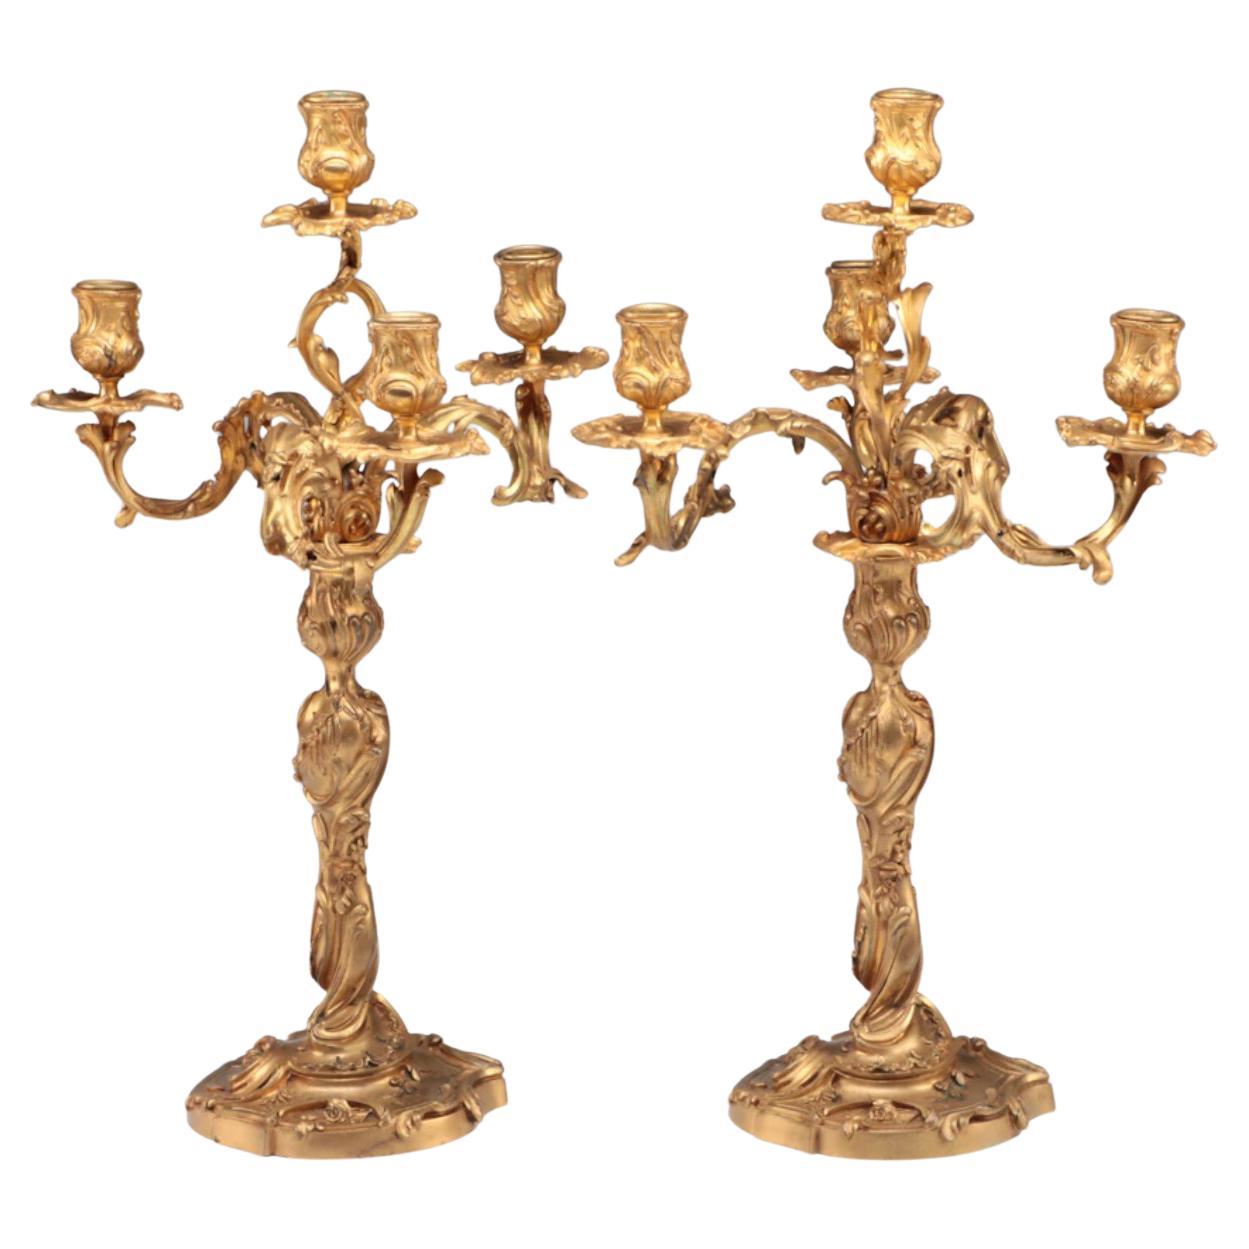 Pair of Ravinet d'Enfert Louis XV Style Ormolu Candelabra, Early 20th C For Sale